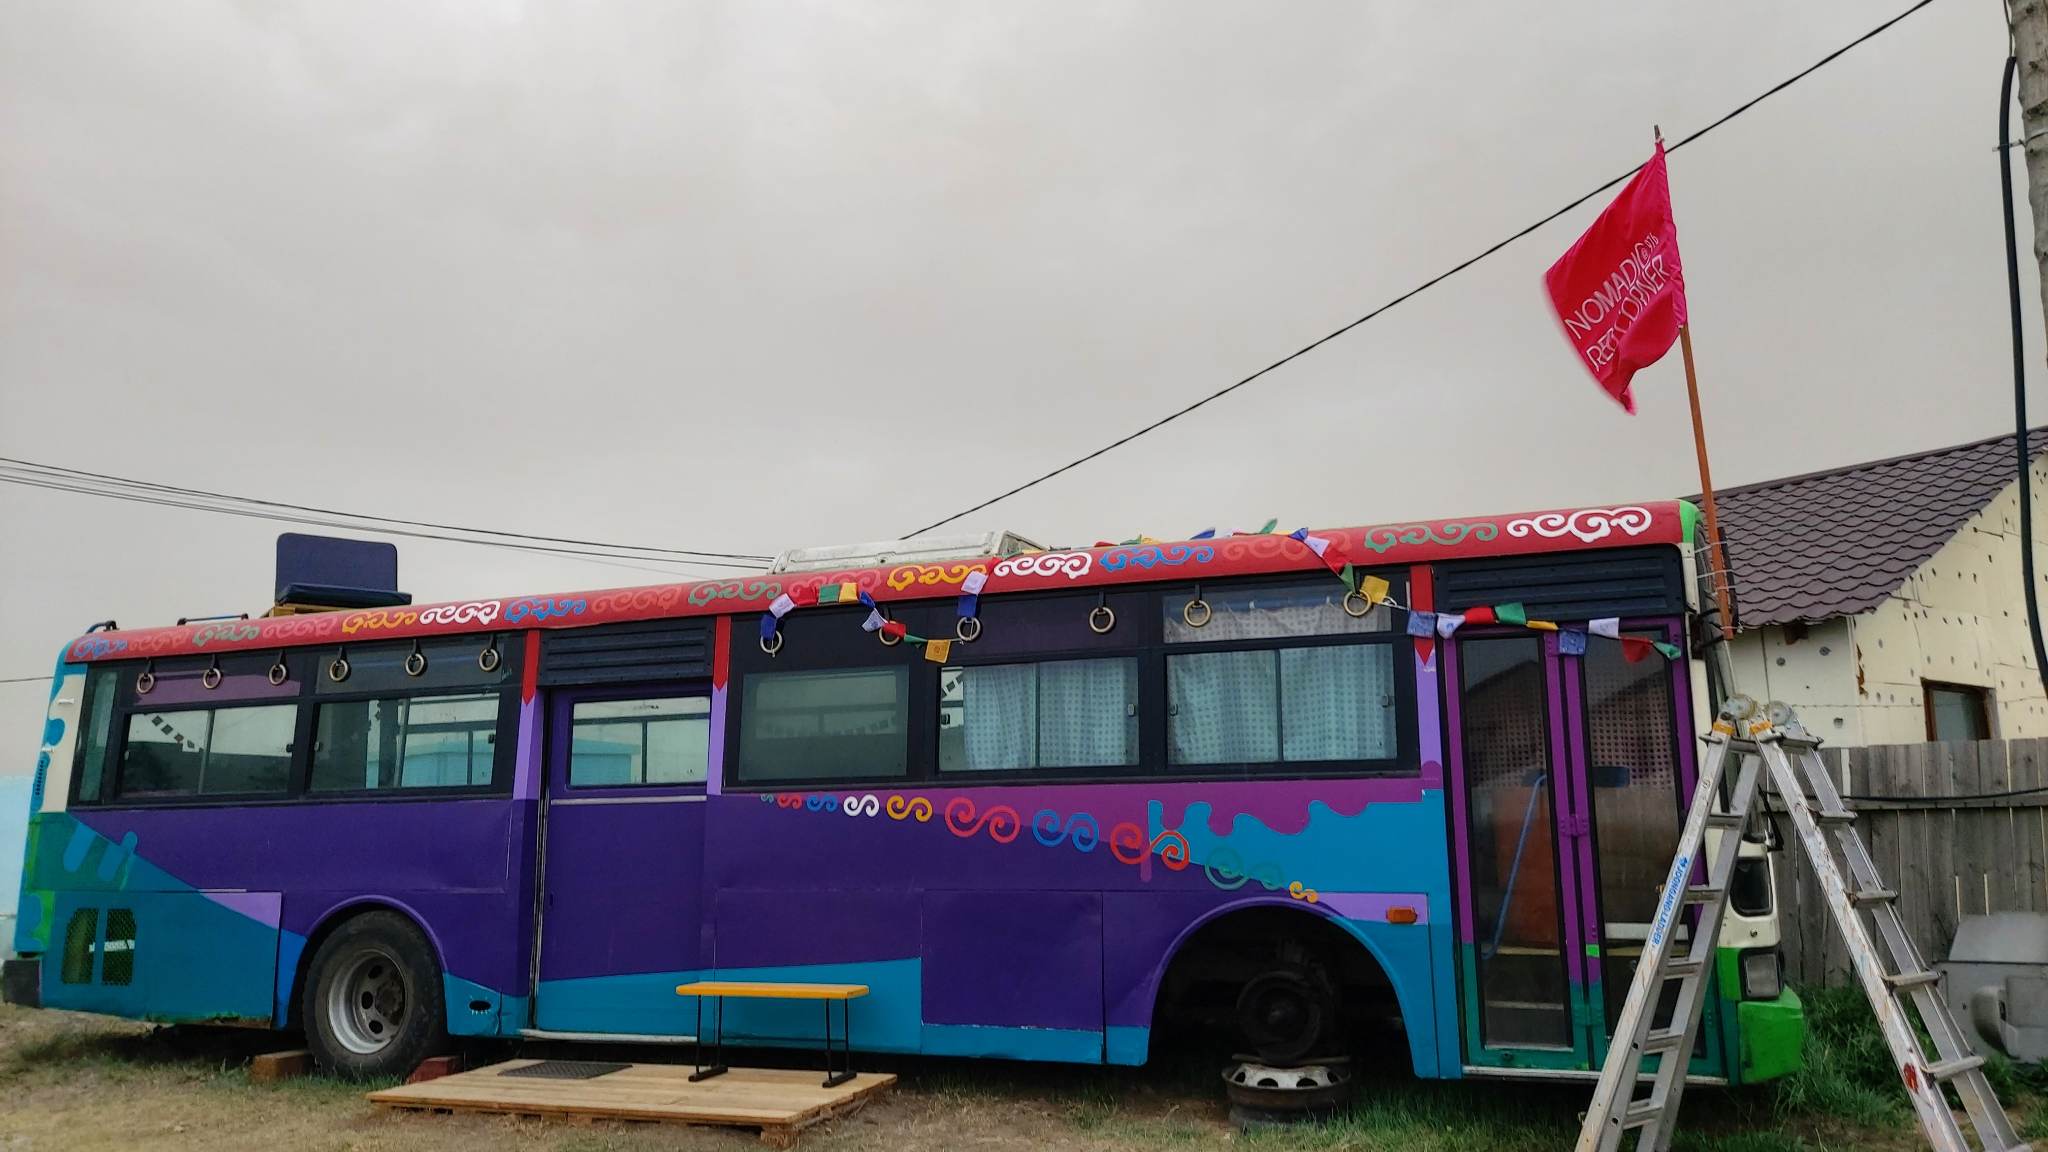 BUS ART STUDIO CREATED BY RESIDENT ARTISTS